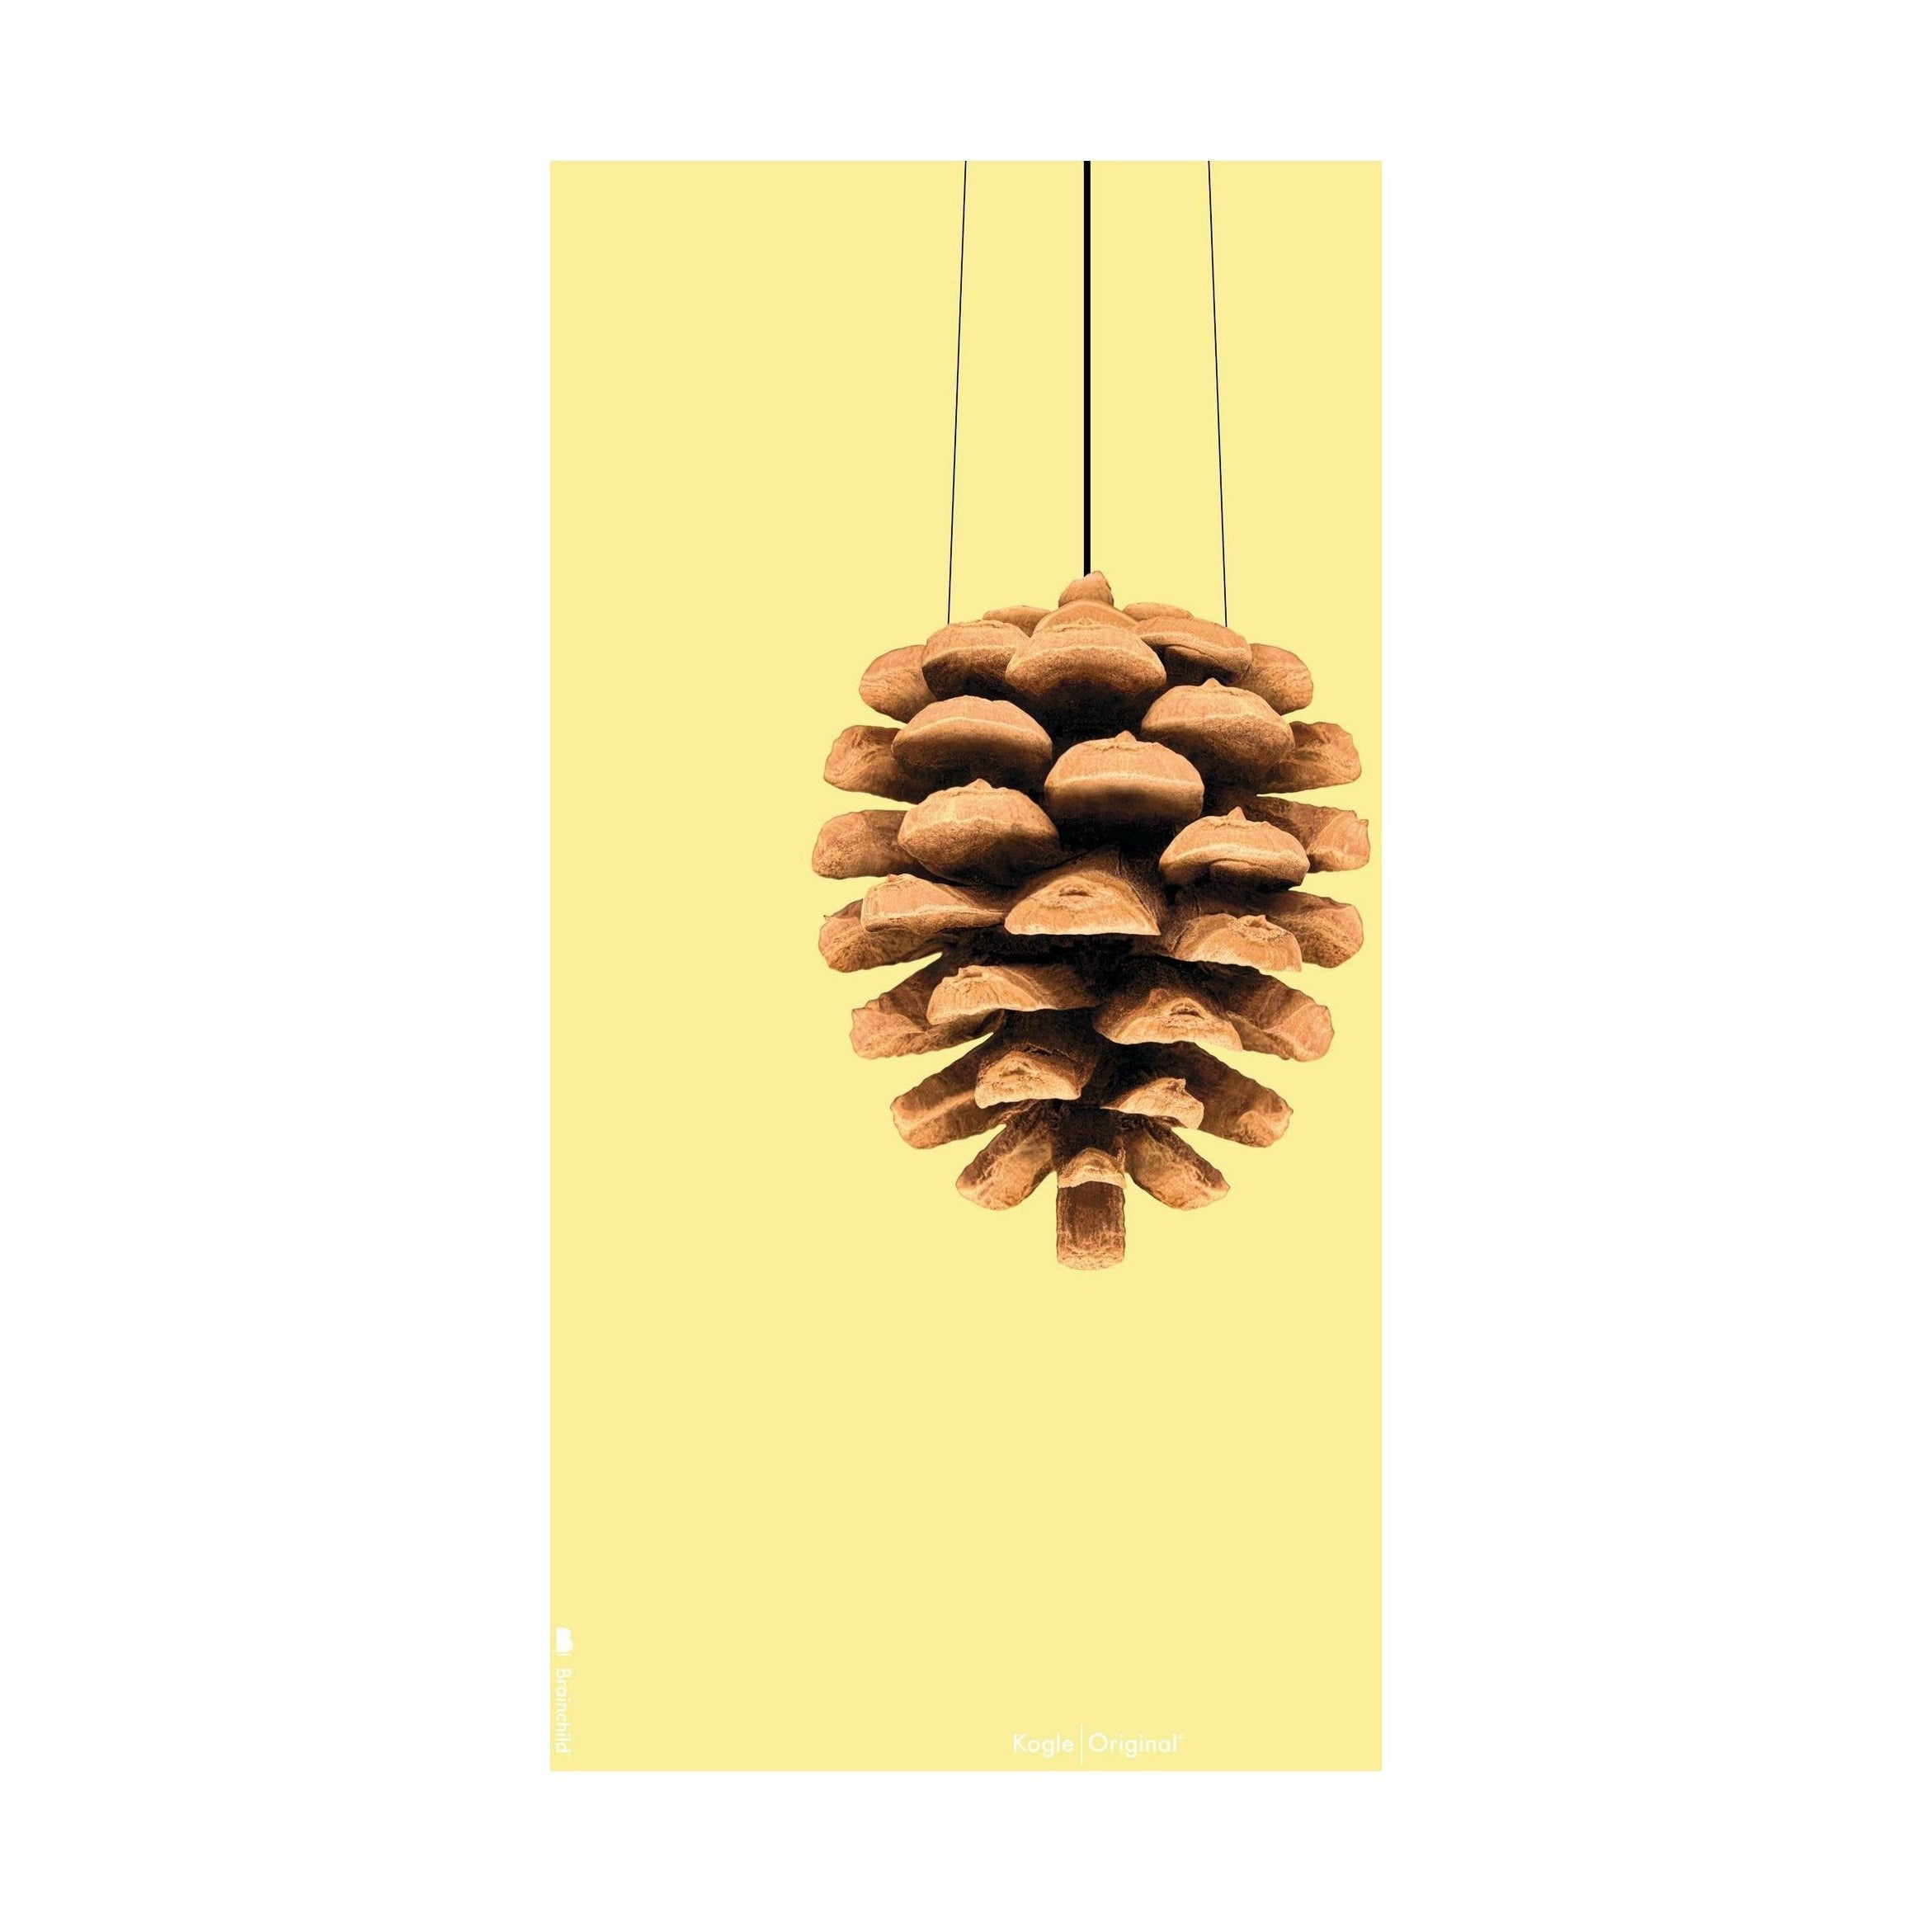 Brainchild Pine Cone Classic Poster Without Frame 50x70 Cm, Yellow Background